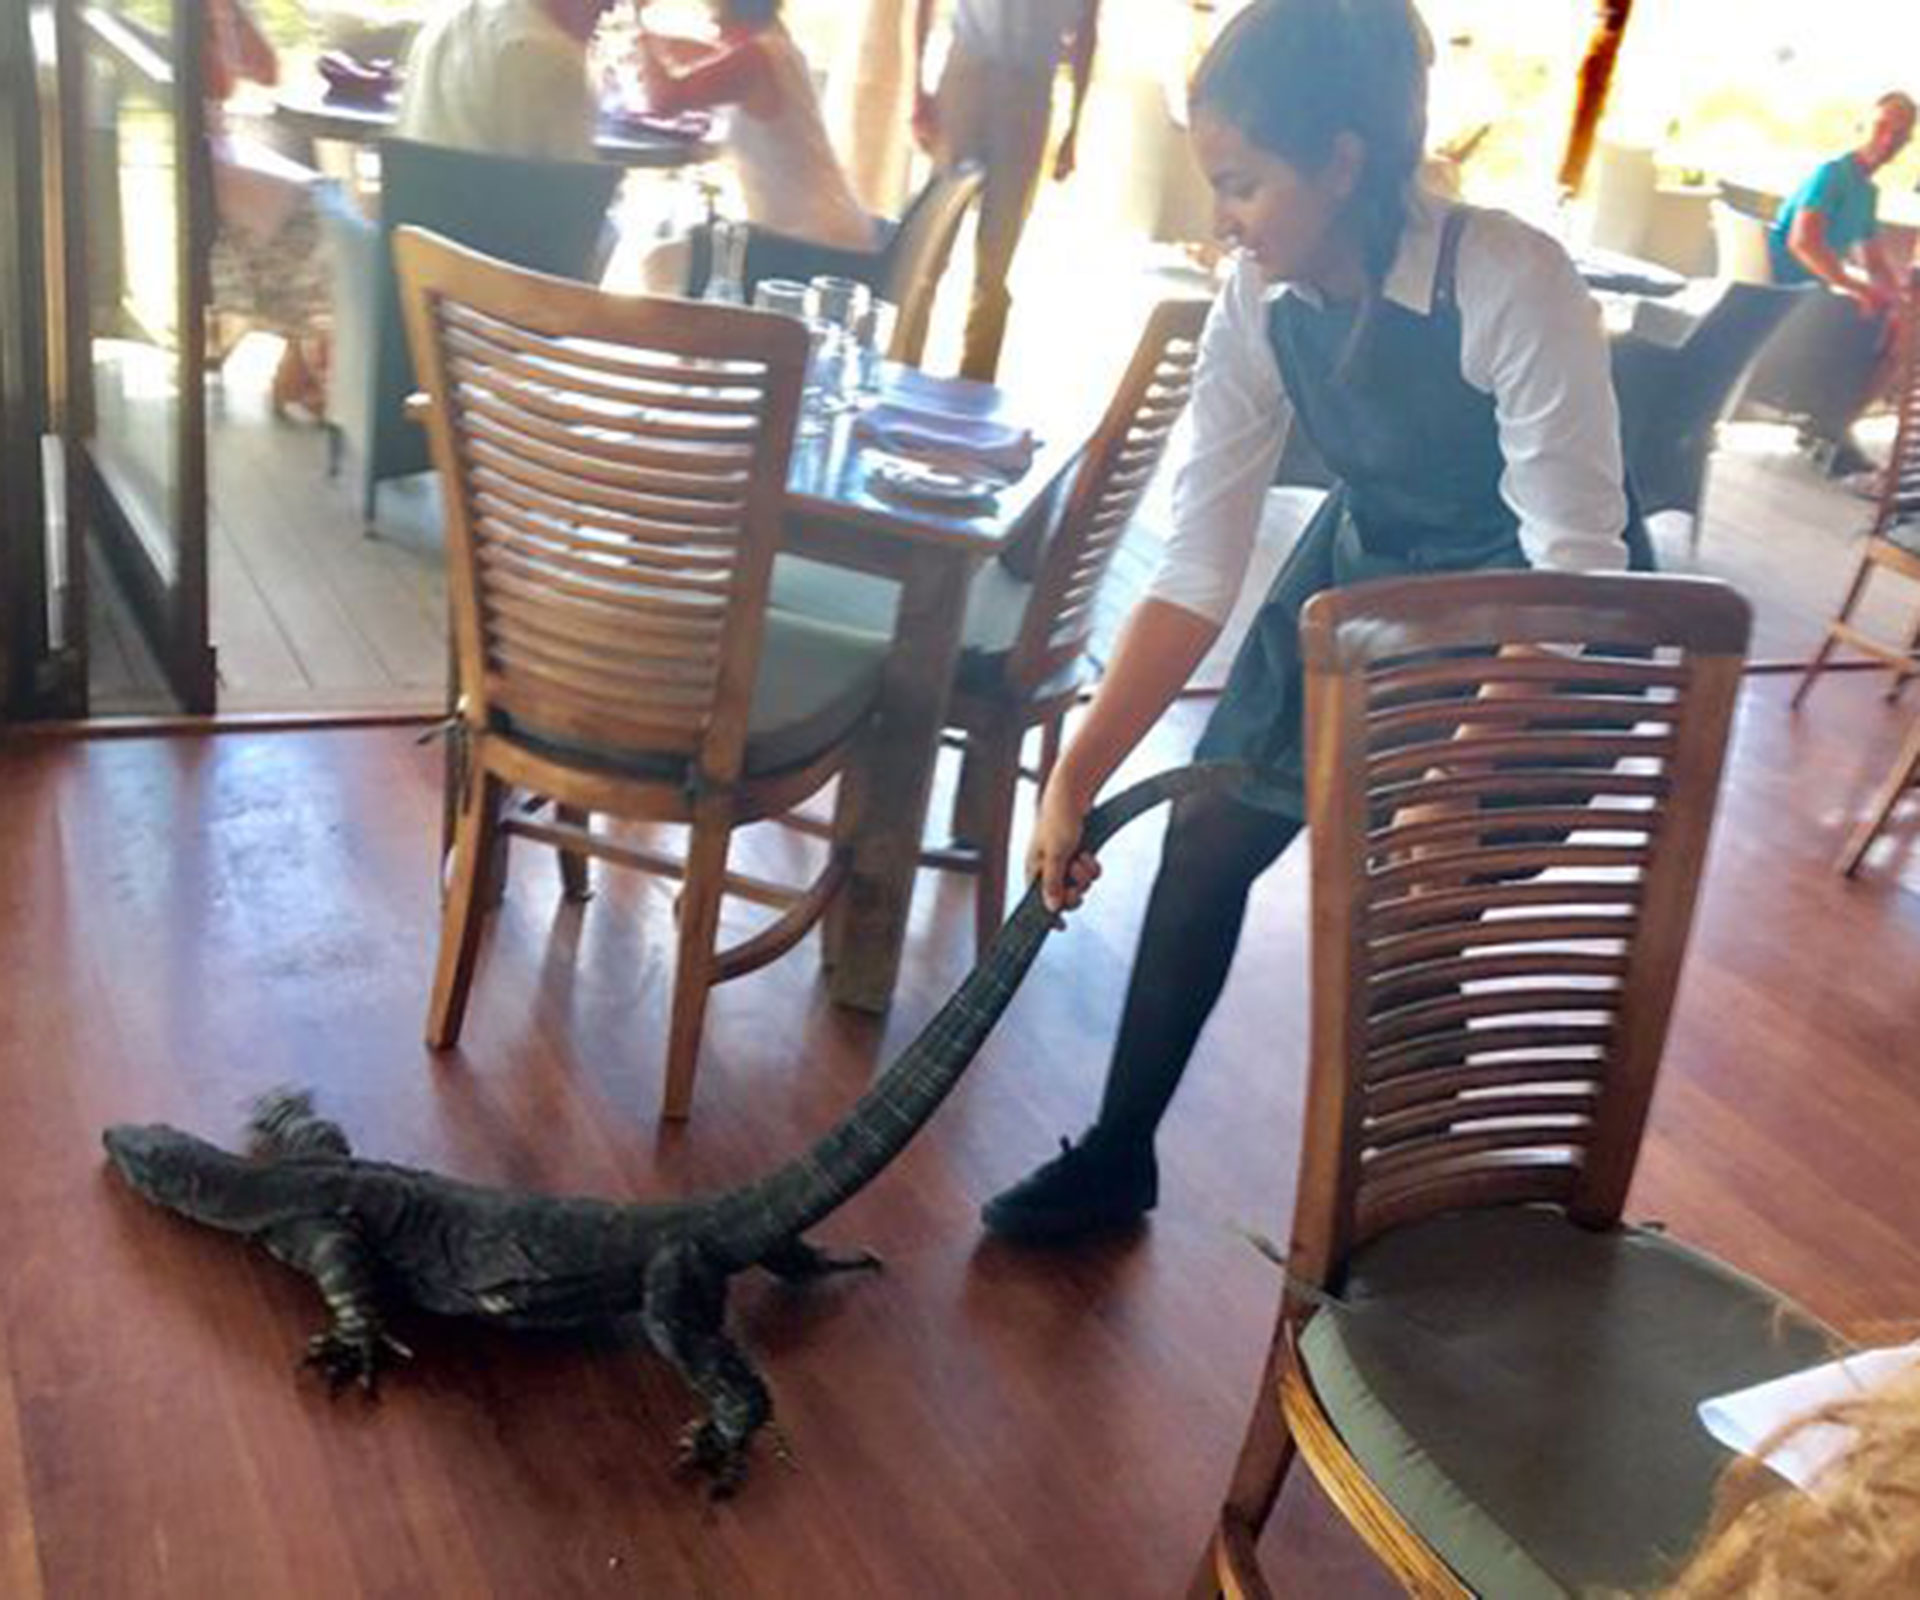 Waitress drags huge goanna she thought was a dog out NSW restaurant, promptly goes viral